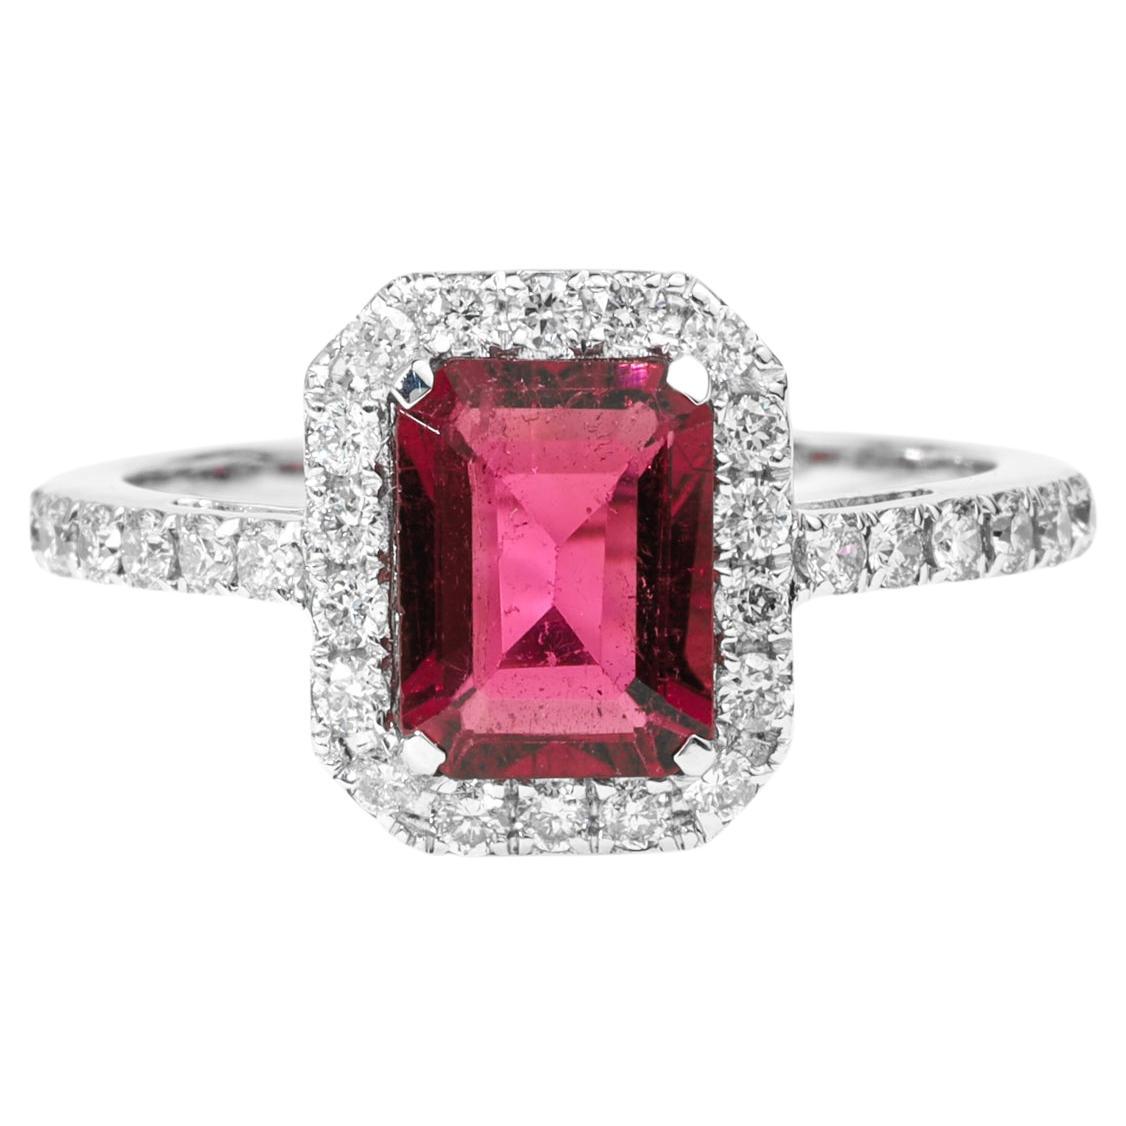 1.5 Carat Rubellite Tourmaline with 0.5Ct Diamonds Cocktail Ring 18k White For Sale